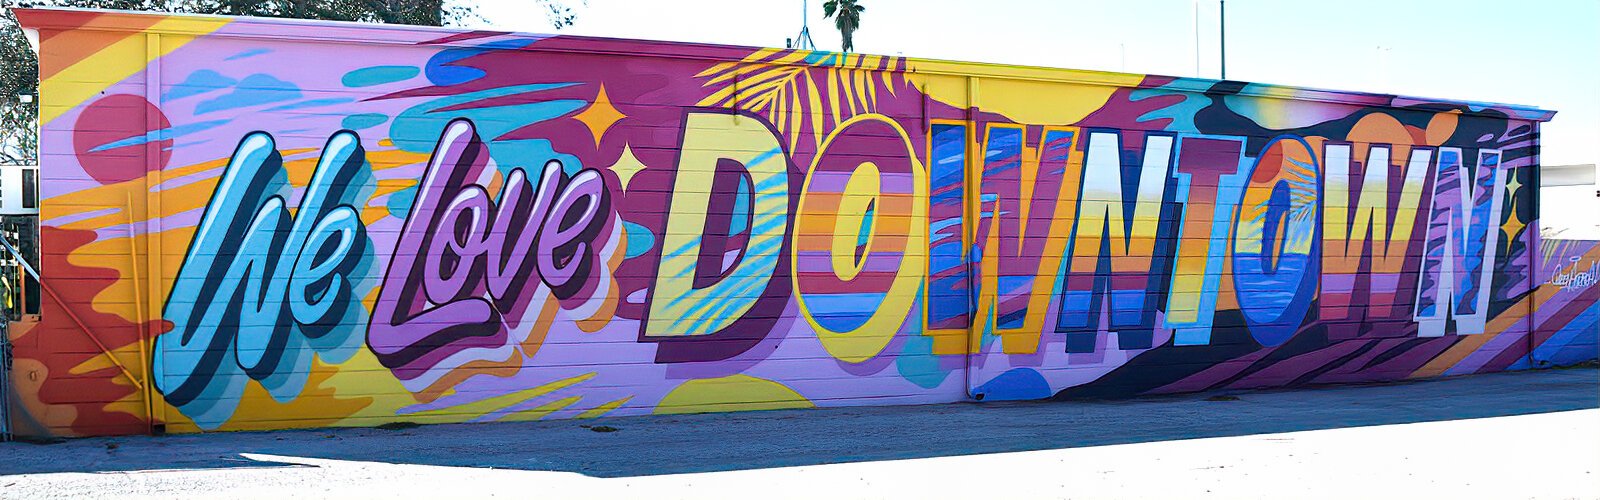 This “We Love Downtown” mural just south of Tampa Heights was created by NYC graffiti legend Queen Andrea One for the inaugural Tampa Walls mural festival in 2022.